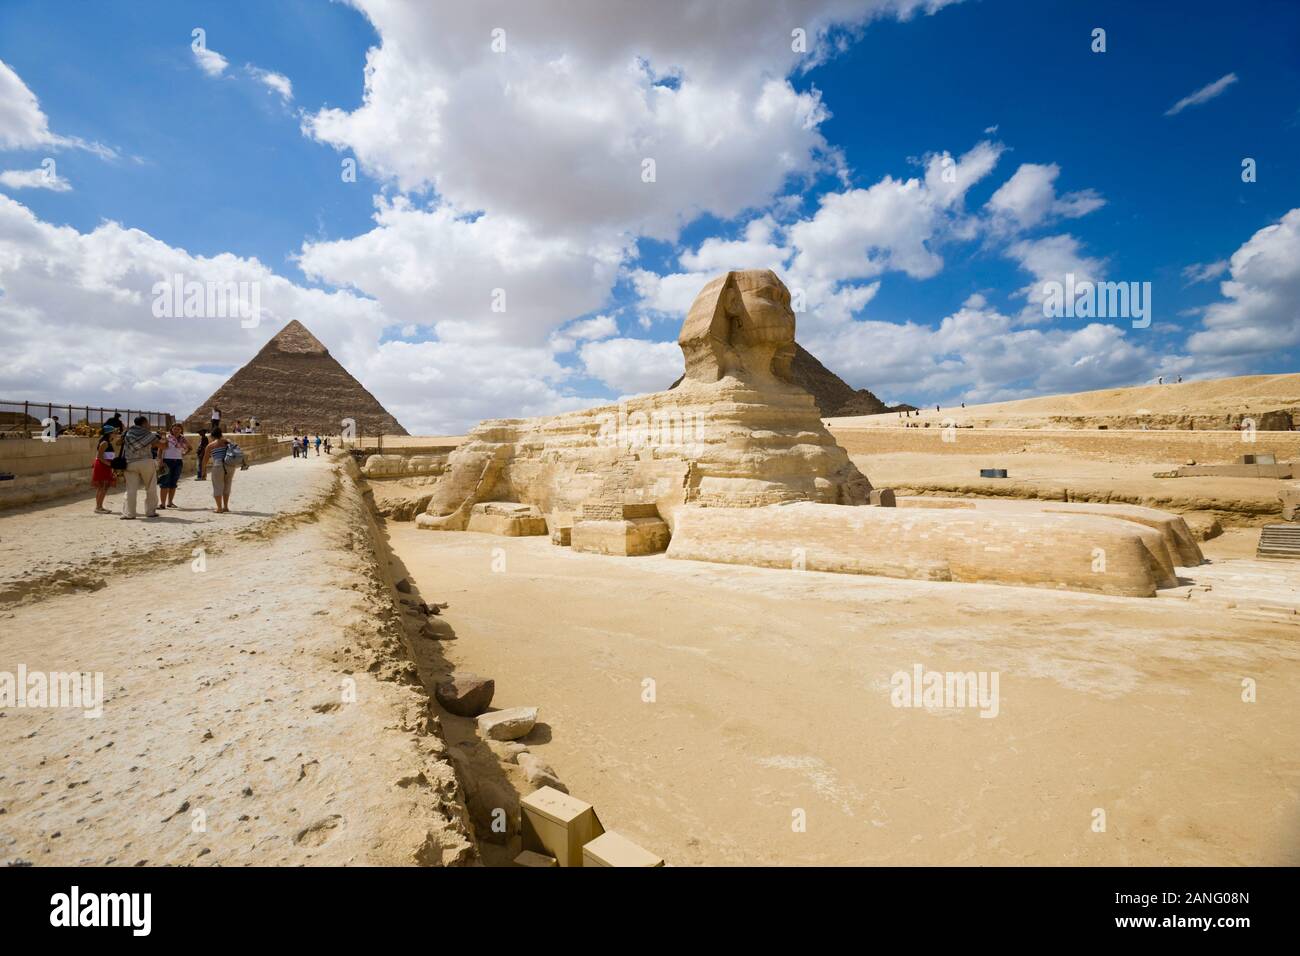 Great Sphinx and Great pyramids, in sandy desert, giza, cairo, Egypt, North Africa, Africa Stock Photo